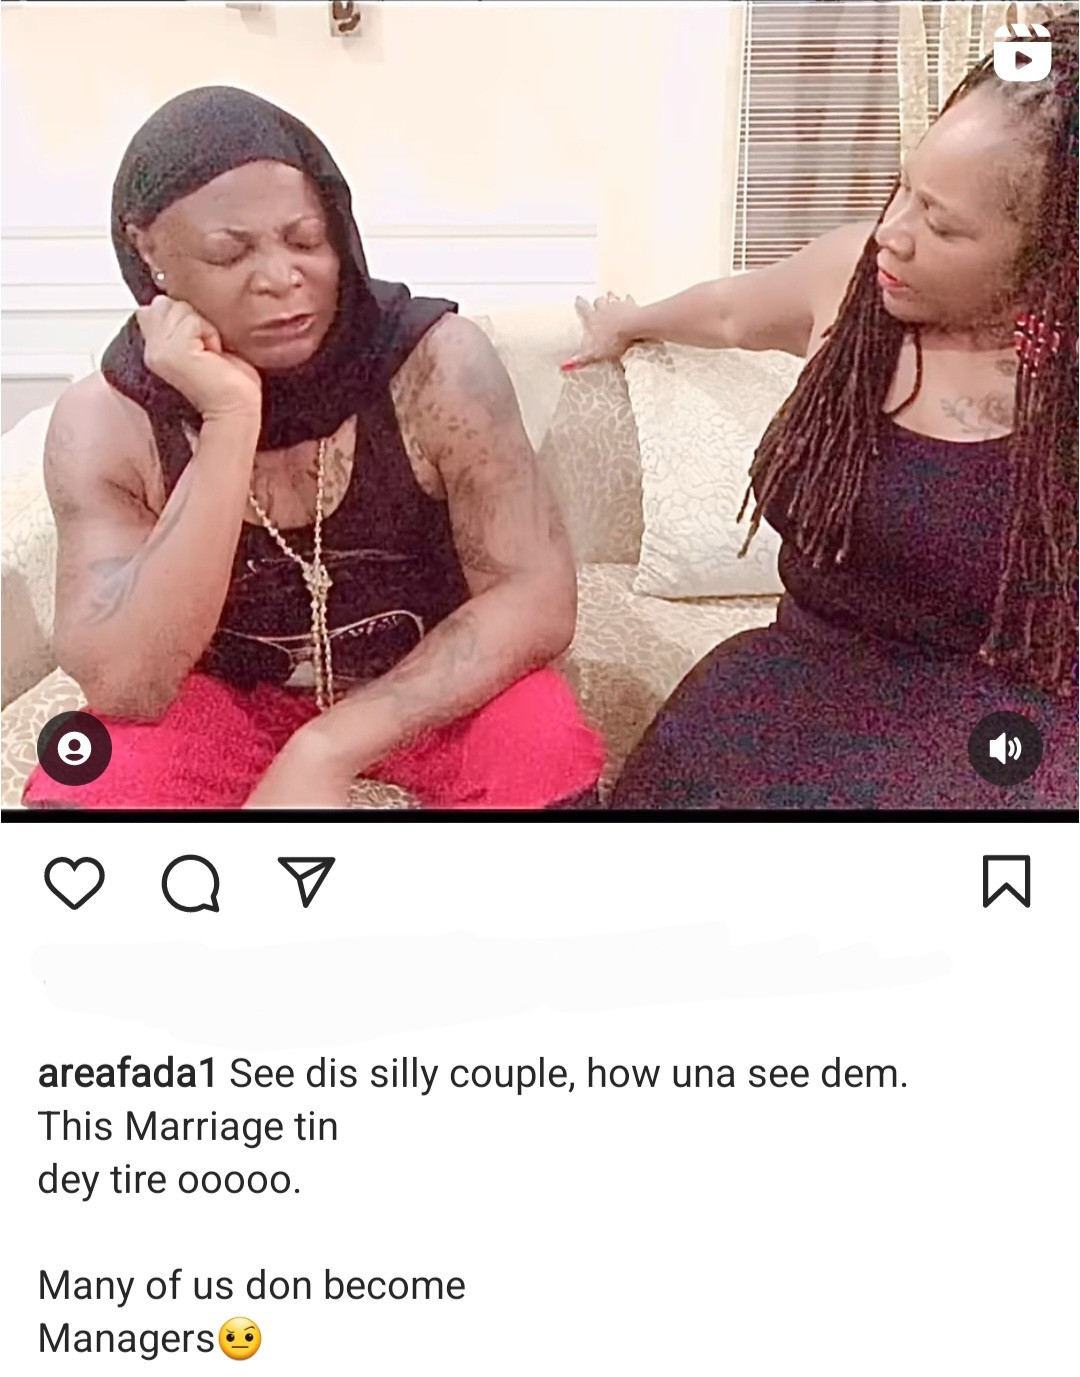 “MARRIAGE IS MANAGEMENT” CHARLEYBOY AND WIFE LADY D SAY AS THEY REVEAL THEY ALSO HAVE ISSUES IN THEIR UNION